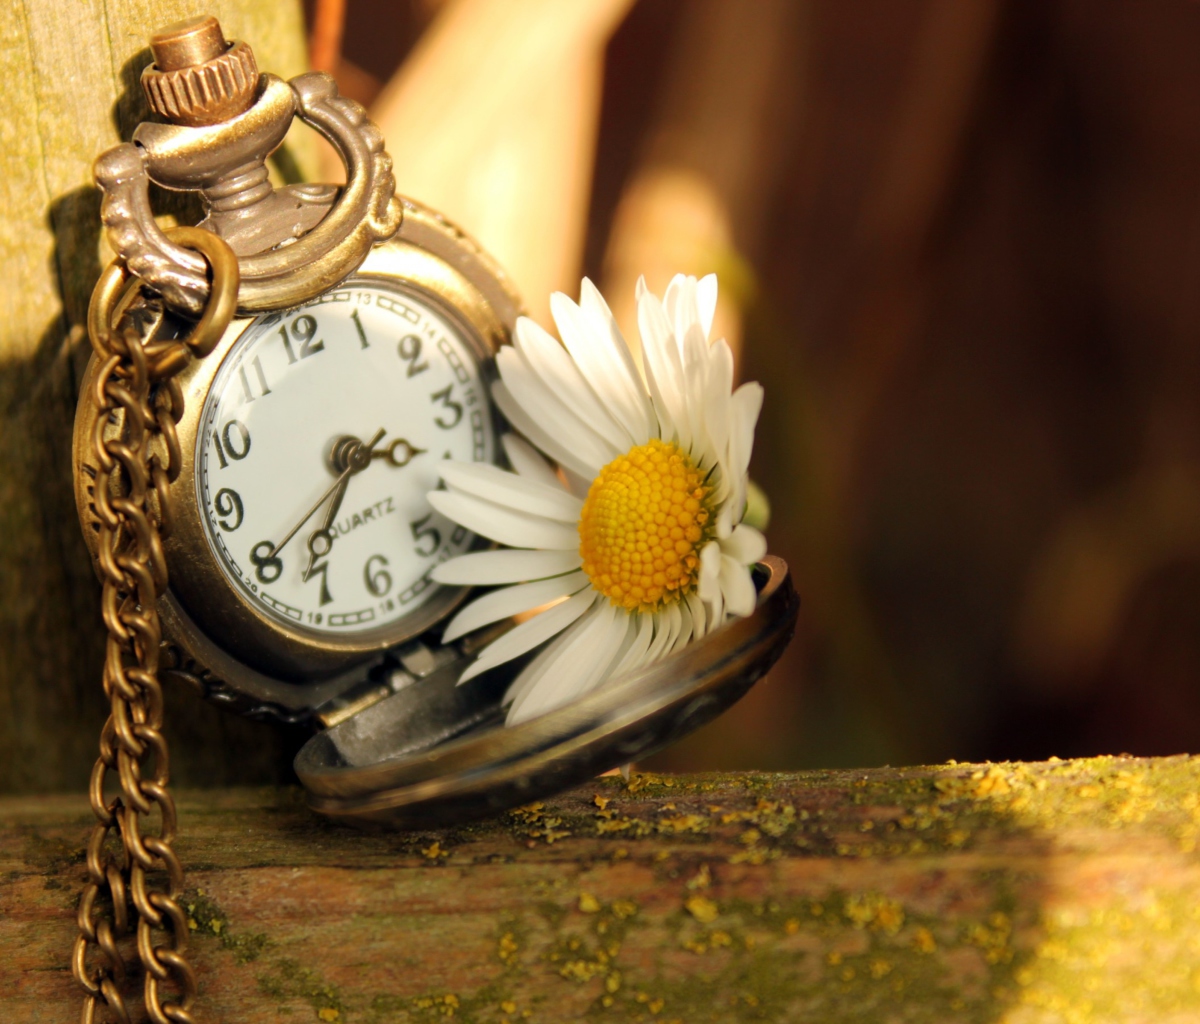 Das Vintage Watch And Daisy Wallpaper 1200x1024